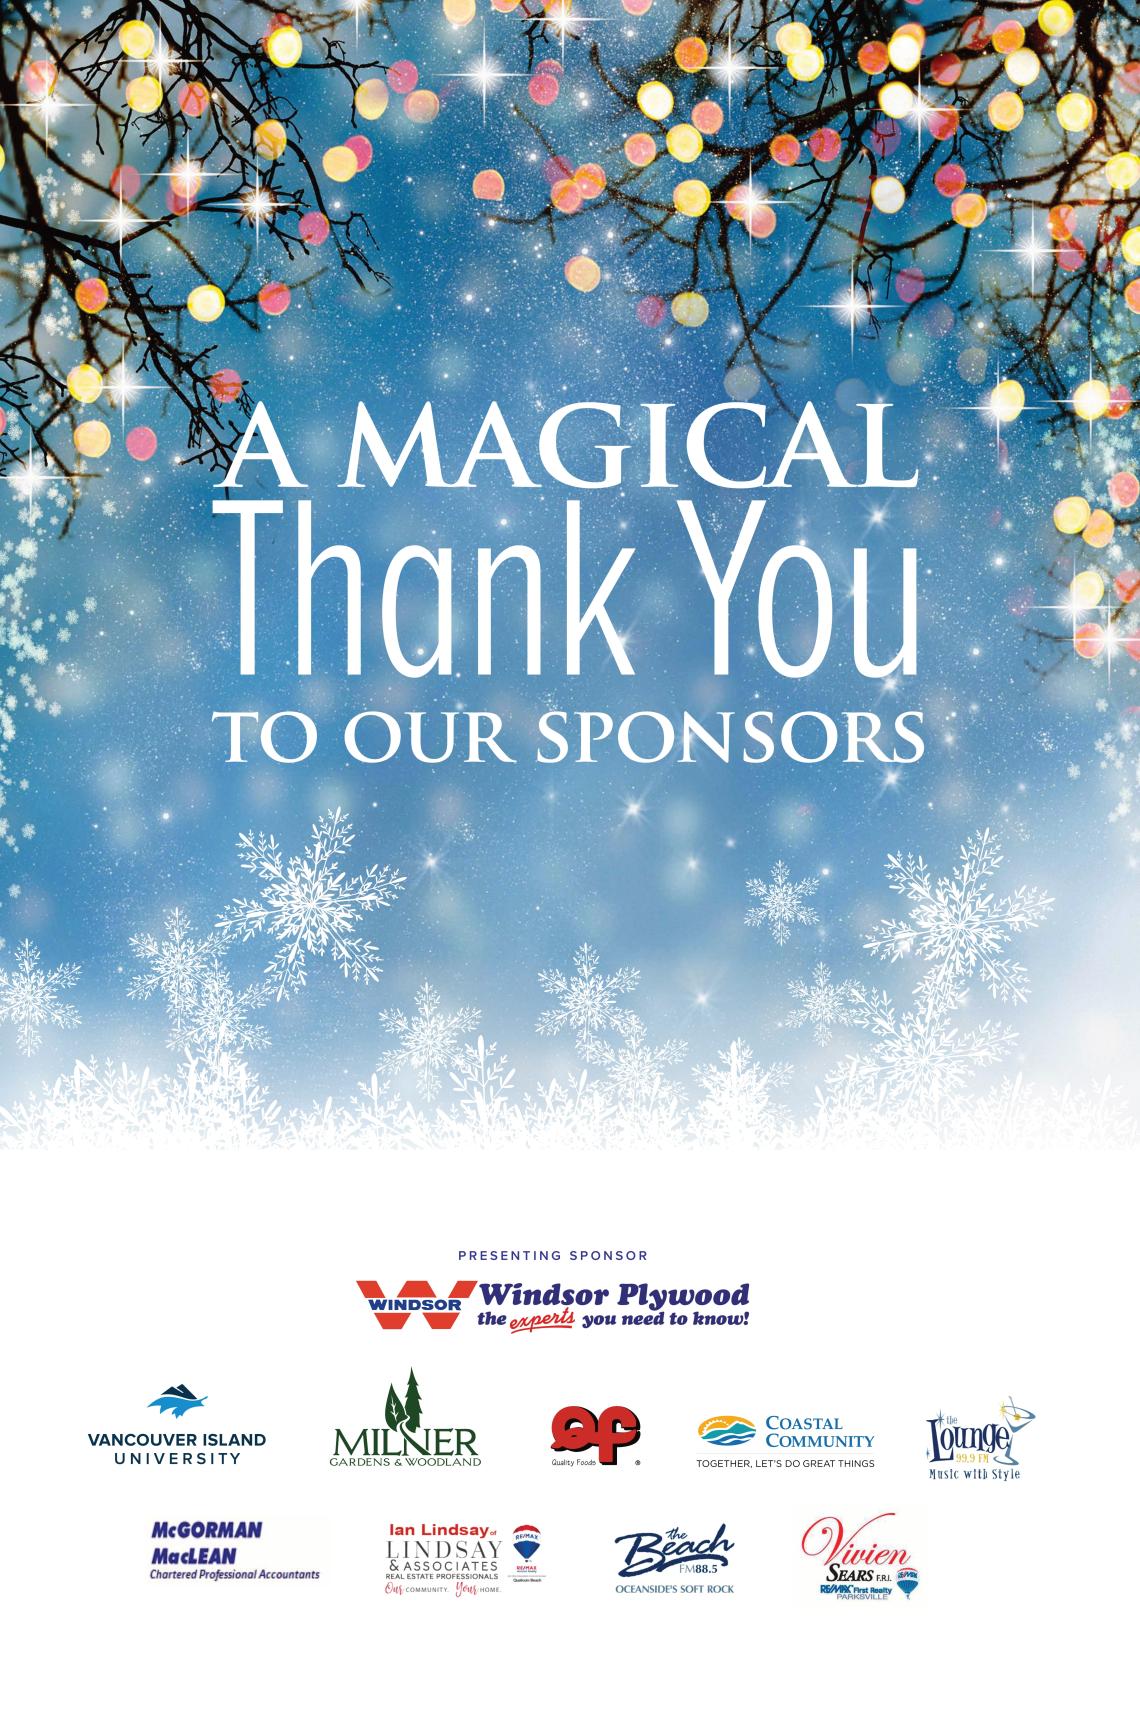 A Magical Thank You to our Sponsors poster